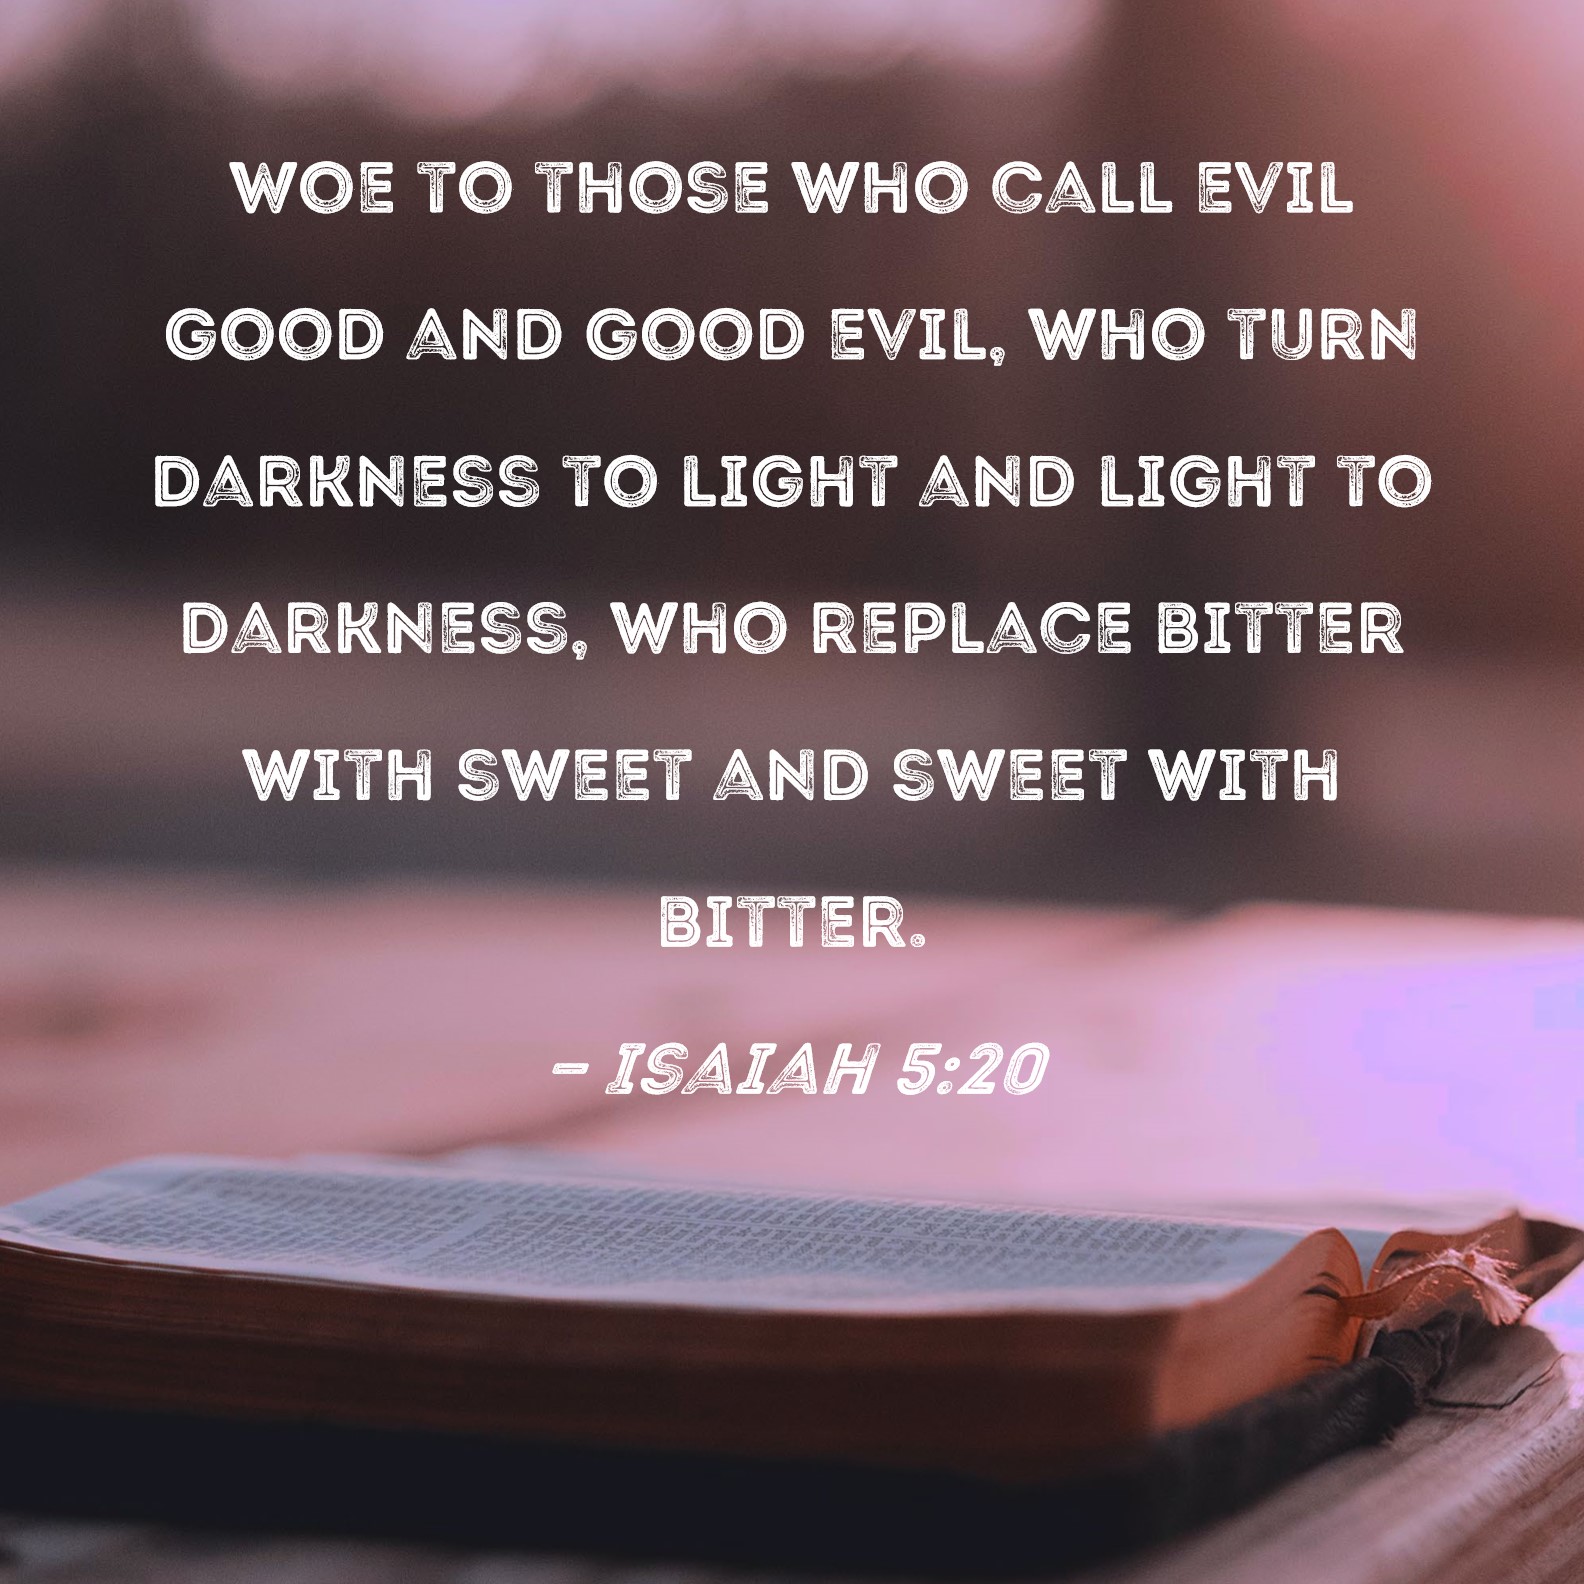 isaiah-5-20-woe-to-those-who-call-evil-good-and-good-evil-who-turn